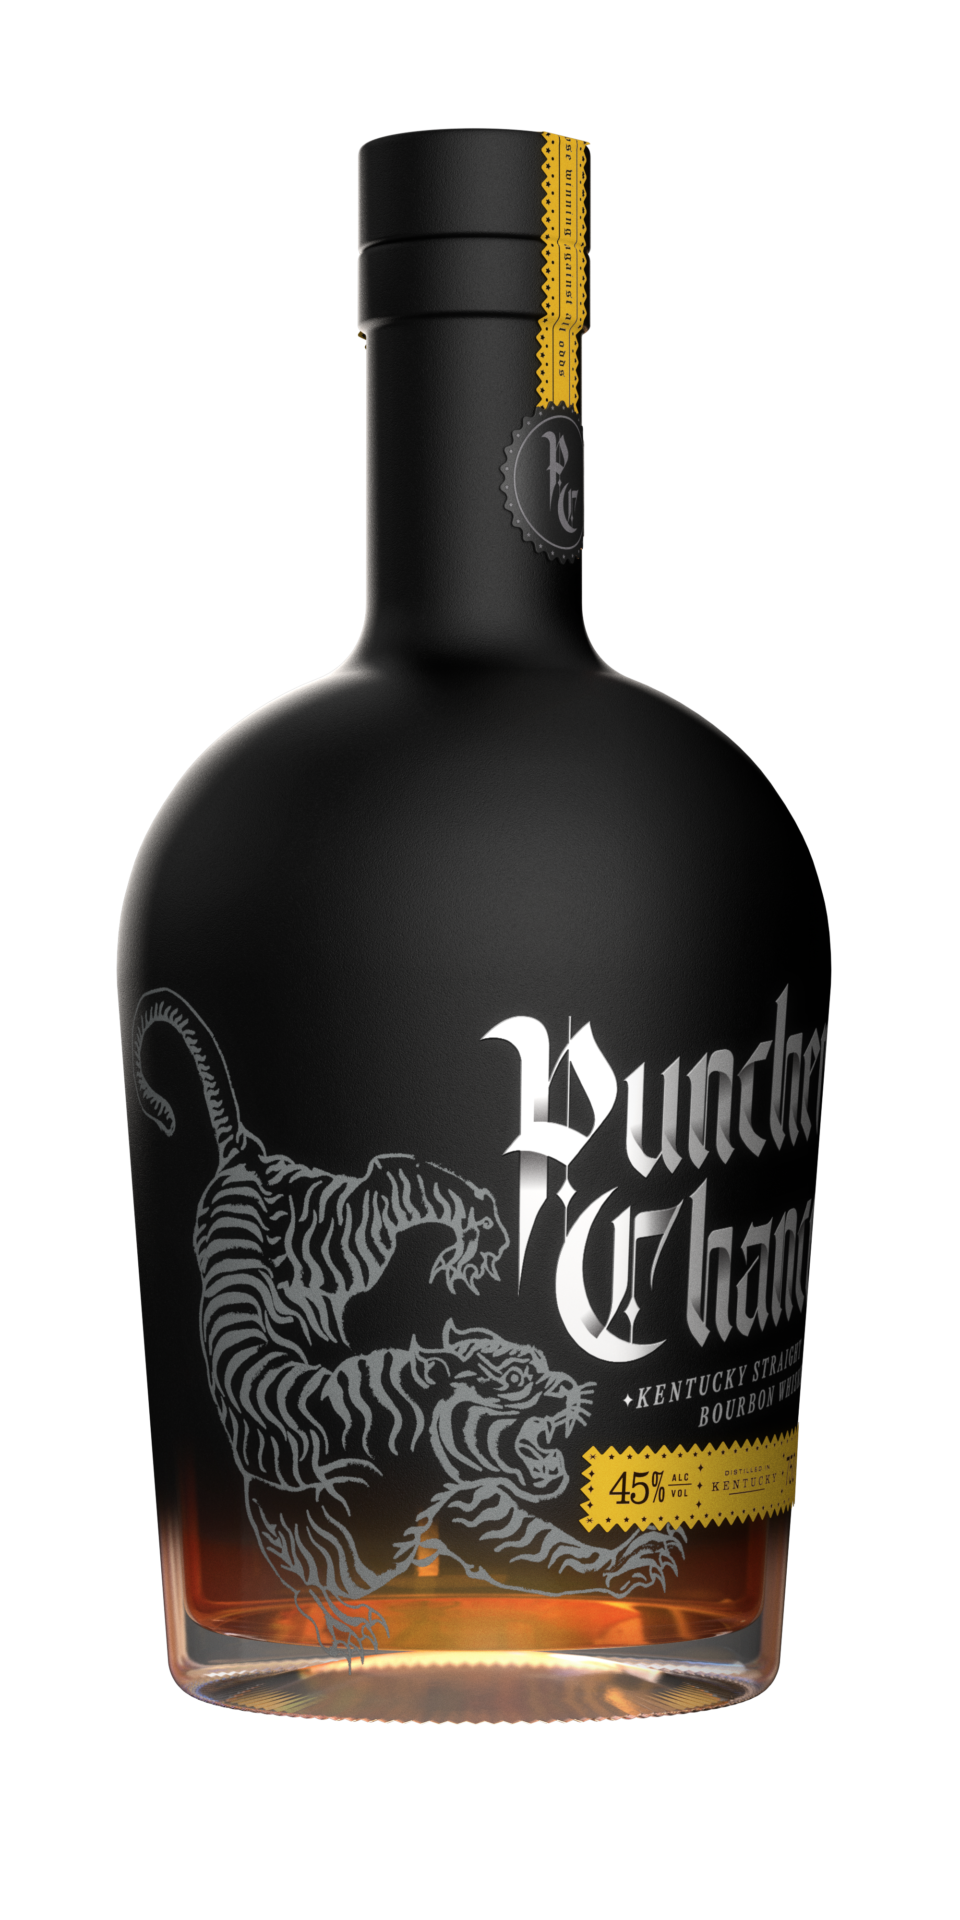 Introducing Chance™ Kentucky Straight Bourbon 4-, 5-, and 6-year old blend associated with international sports & entertainment Buffer - Spirited Magazine